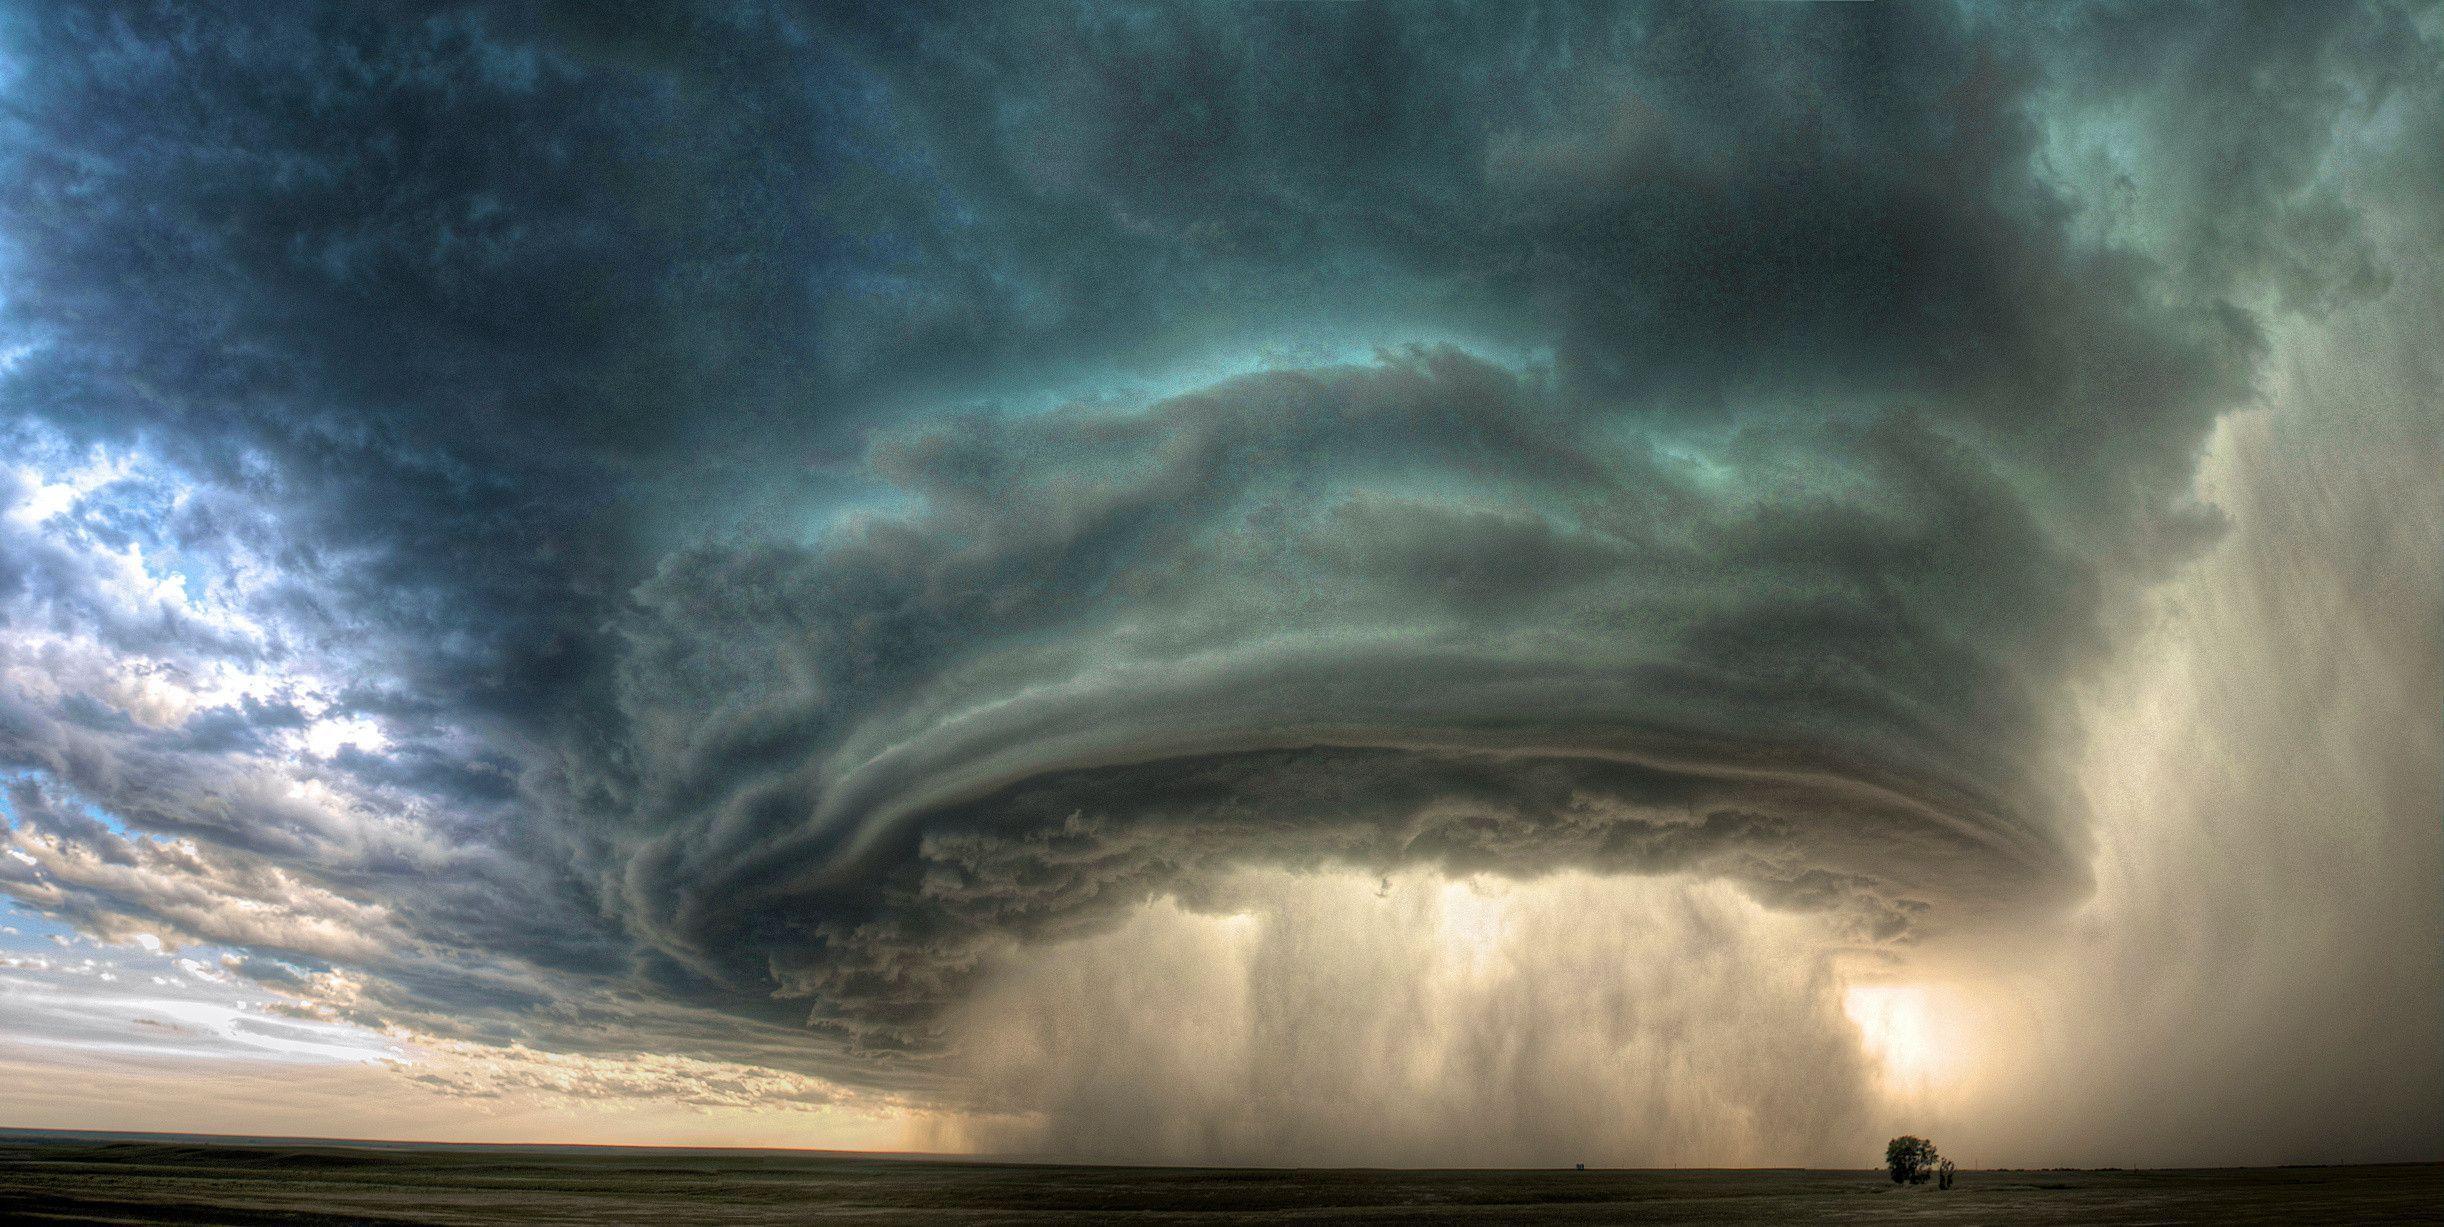 Supercell thunderstorm, July 28th, 2010